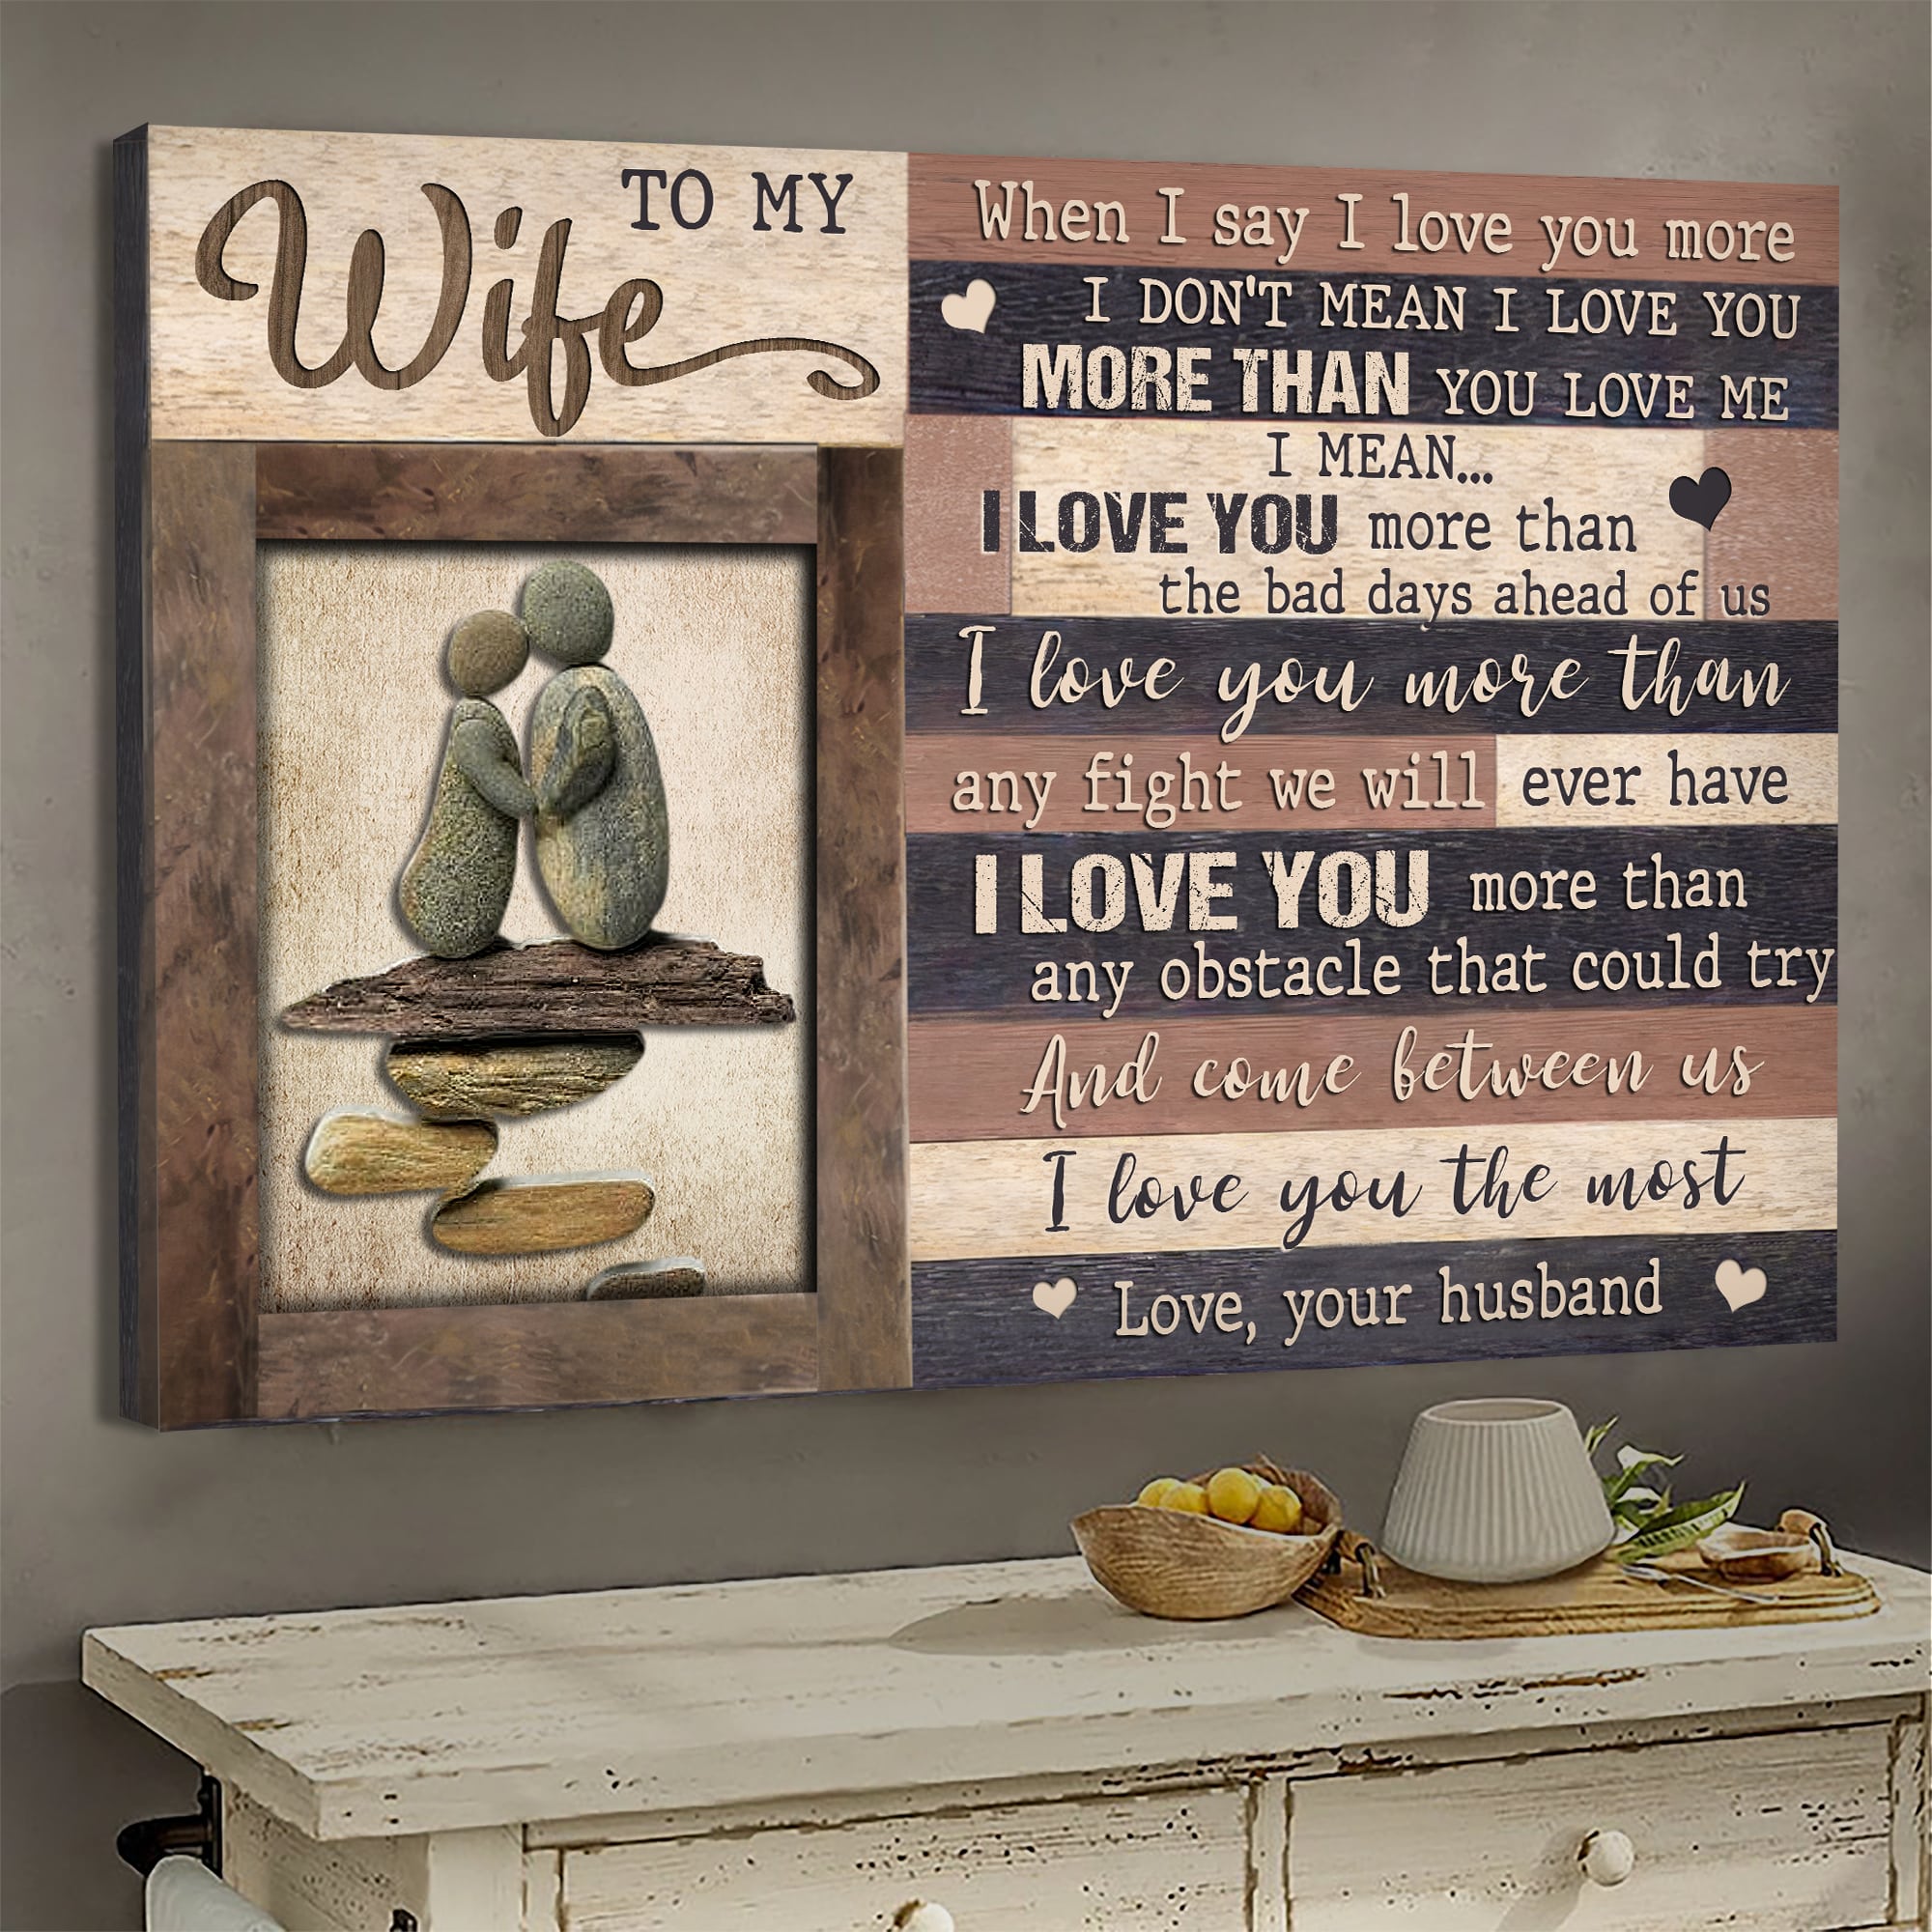 To my wife, Rock painting, I love you the most - Couple Portrait Canvas Prints Wall Art